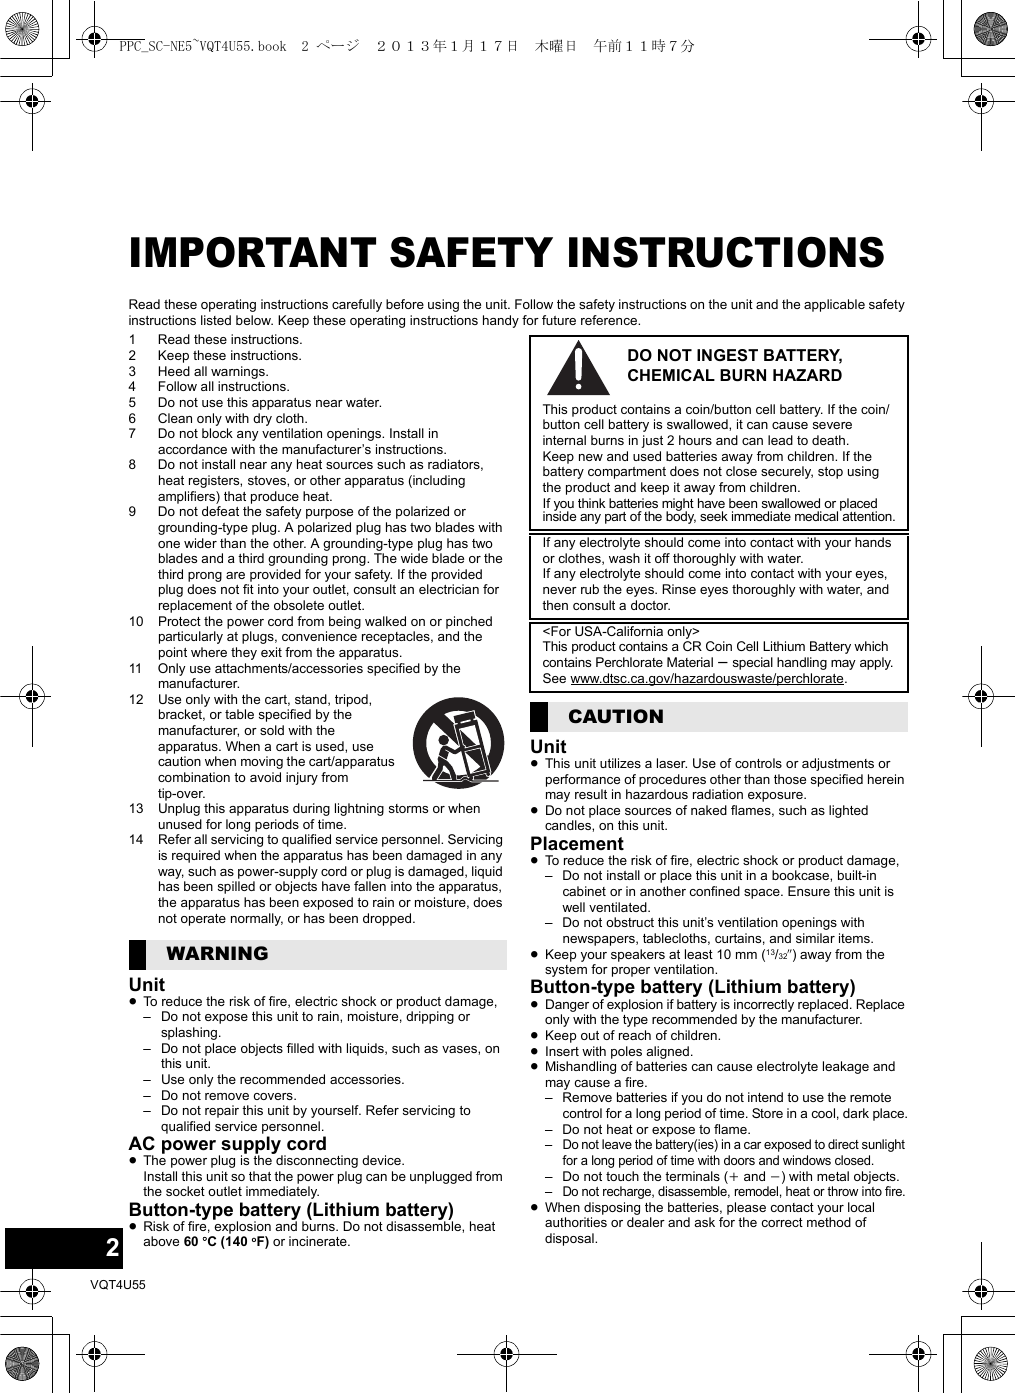 2VQT4U55IMPORTANT SAFETY INSTRUCTIONSRead these operating instructions carefully before using the unit. Follow the safety instructions on the unit and the applicable safety instructions listed below. Keep these operating instructions handy for future reference.1 Read these instructions.2 Keep these instructions.3 Heed all warnings.4 Follow all instructions.5 Do not use this apparatus near water.6 Clean only with dry cloth.7 Do not block any ventilation openings. Install in accordance with the manufacturer’s instructions.8 Do not install near any heat sources such as radiators, heat registers, stoves, or other apparatus (including amplifiers) that produce heat.9 Do not defeat the safety purpose of the polarized or grounding-type plug. A polarized plug has two blades with one wider than the other. A grounding-type plug has two blades and a third grounding prong. The wide blade or the third prong are provided for your safety. If the provided plug does not fit into your outlet, consult an electrician for replacement of the obsolete outlet.10 Protect the power cord from being walked on or pinched particularly at plugs, convenience receptacles, and the point where they exit from the apparatus.11 Only use attachments/accessories specified by the manufacturer.12 Use only with the cart, stand, tripod, bracket, or table specified by the manufacturer, or sold with the apparatus. When a cart is used, use caution when moving the cart/apparatus combination to avoid injury from tip-over.13 Unplug this apparatus during lightning storms or when unused for long periods of time.14 Refer all servicing to qualified service personnel. Servicing is required when the apparatus has been damaged in any way, such as power-supply cord or plug is damaged, liquid has been spilled or objects have fallen into the apparatus, the apparatus has been exposed to rain or moisture, does not operate normally, or has been dropped.Unit≥To reduce the risk of fire, electric shock or product damage,– Do not expose this unit to rain, moisture, dripping or splashing.– Do not place objects filled with liquids, such as vases, on this unit.– Use only the recommended accessories.– Do not remove covers.– Do not repair this unit by yourself. Refer servicing to qualified service personnel.AC power supply cord≥The power plug is the disconnecting device. Install this unit so that the power plug can be unplugged from the socket outlet immediately.Button-type battery (Lithium battery)≥Risk of fire, explosion and burns. Do not disassemble, heat above 60 oC (140 oF) or incinerate.Unit≥This unit utilizes a laser. Use of controls or adjustments or performance of procedures other than those specified herein may result in hazardous radiation exposure.≥Do not place sources of naked flames, such as lighted candles, on this unit.Placement≥To reduce the risk of fire, electric shock or product damage,– Do not install or place this unit in a bookcase, built-in cabinet or in another confined space. Ensure this unit is well ventilated.– Do not obstruct this unit’s ventilation openings with newspapers, tablecloths, curtains, and similar items.≥Keep your speakers at least 10 mm (13/32q) away from the system for proper ventilation.Button-type battery (Lithium battery)≥Danger of explosion if battery is incorrectly replaced. Replace only with the type recommended by the manufacturer.≥Keep out of reach of children.≥Insert with poles aligned.≥Mishandling of batteries can cause electrolyte leakage and may cause a fire.– Remove batteries if you do not intend to use the remote control for a long period of time. Store in a cool, dark place.– Do not heat or expose to flame.– Do not leave the battery(ies) in a car exposed to direct sunlight for a long period of time with doors and windows closed.– Do not touch the terminals (i and j) with metal objects.– Do not recharge, disassemble, remodel, heat or throw into fire.≥When disposing the batteries, please contact your local authorities or dealer and ask for the correct method of disposal.WARNINGDO NOT INGEST BATTERY, CHEMICAL BURN HAZARDThis product contains a coin/button cell battery. If the coin/button cell battery is swallowed, it can cause severe internal burns in just 2 hours and can lead to death.Keep new and used batteries away from children. If the battery compartment does not close securely, stop using the product and keep it away from children.If you think batteries might have been swallowed or placed inside any part of the body, seek immediate medical attention.If any electrolyte should come into contact with your hands or clothes, wash it off thoroughly with water.If any electrolyte should come into contact with your eyes, never rub the eyes. Rinse eyes thoroughly with water, and then consult a doctor.&lt;For USA-California only&gt;This product contains a CR Coin Cell Lithium Battery which contains Perchlorate Material s special handling may apply.See www.dtsc.ca.gov/hazardouswaste/perchlorate.CAUTIONPPC_SC-NE5~VQT4U55.book  2 ページ  ２０１３年１月１７日　木曜日　午前１１時７分